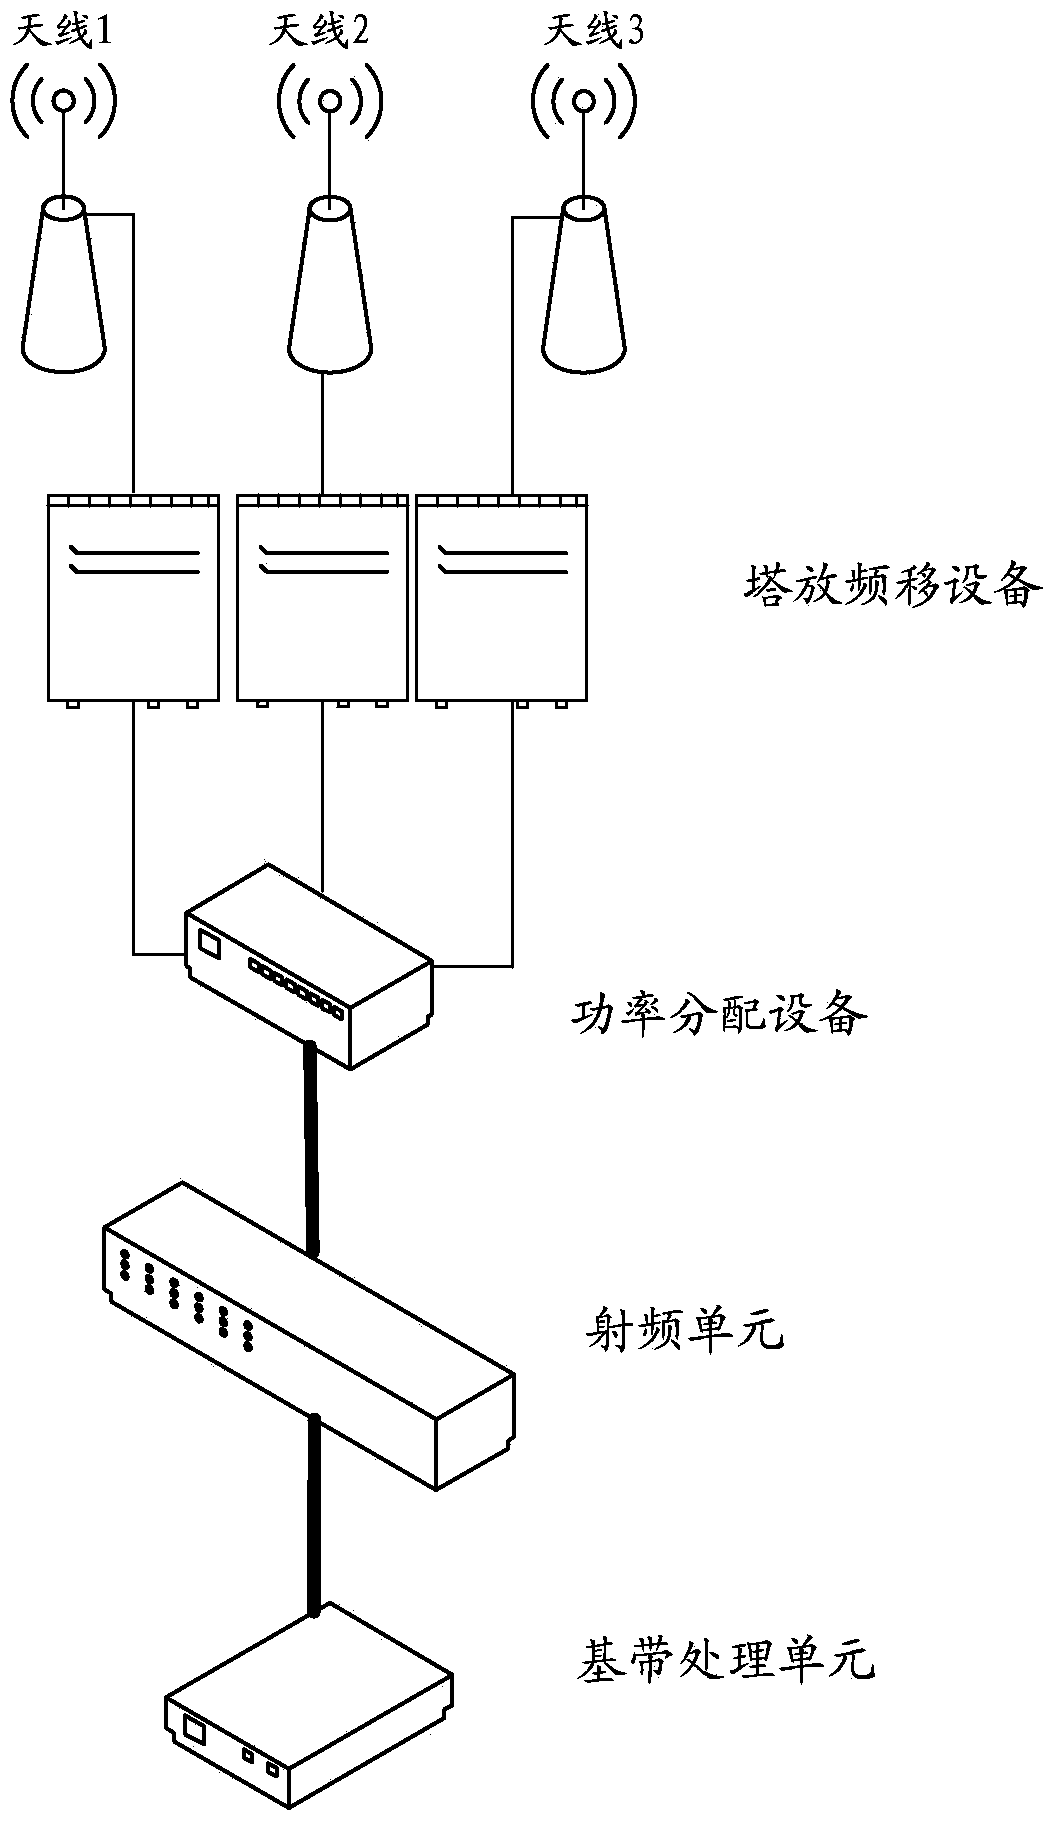 Method and device for distributing power